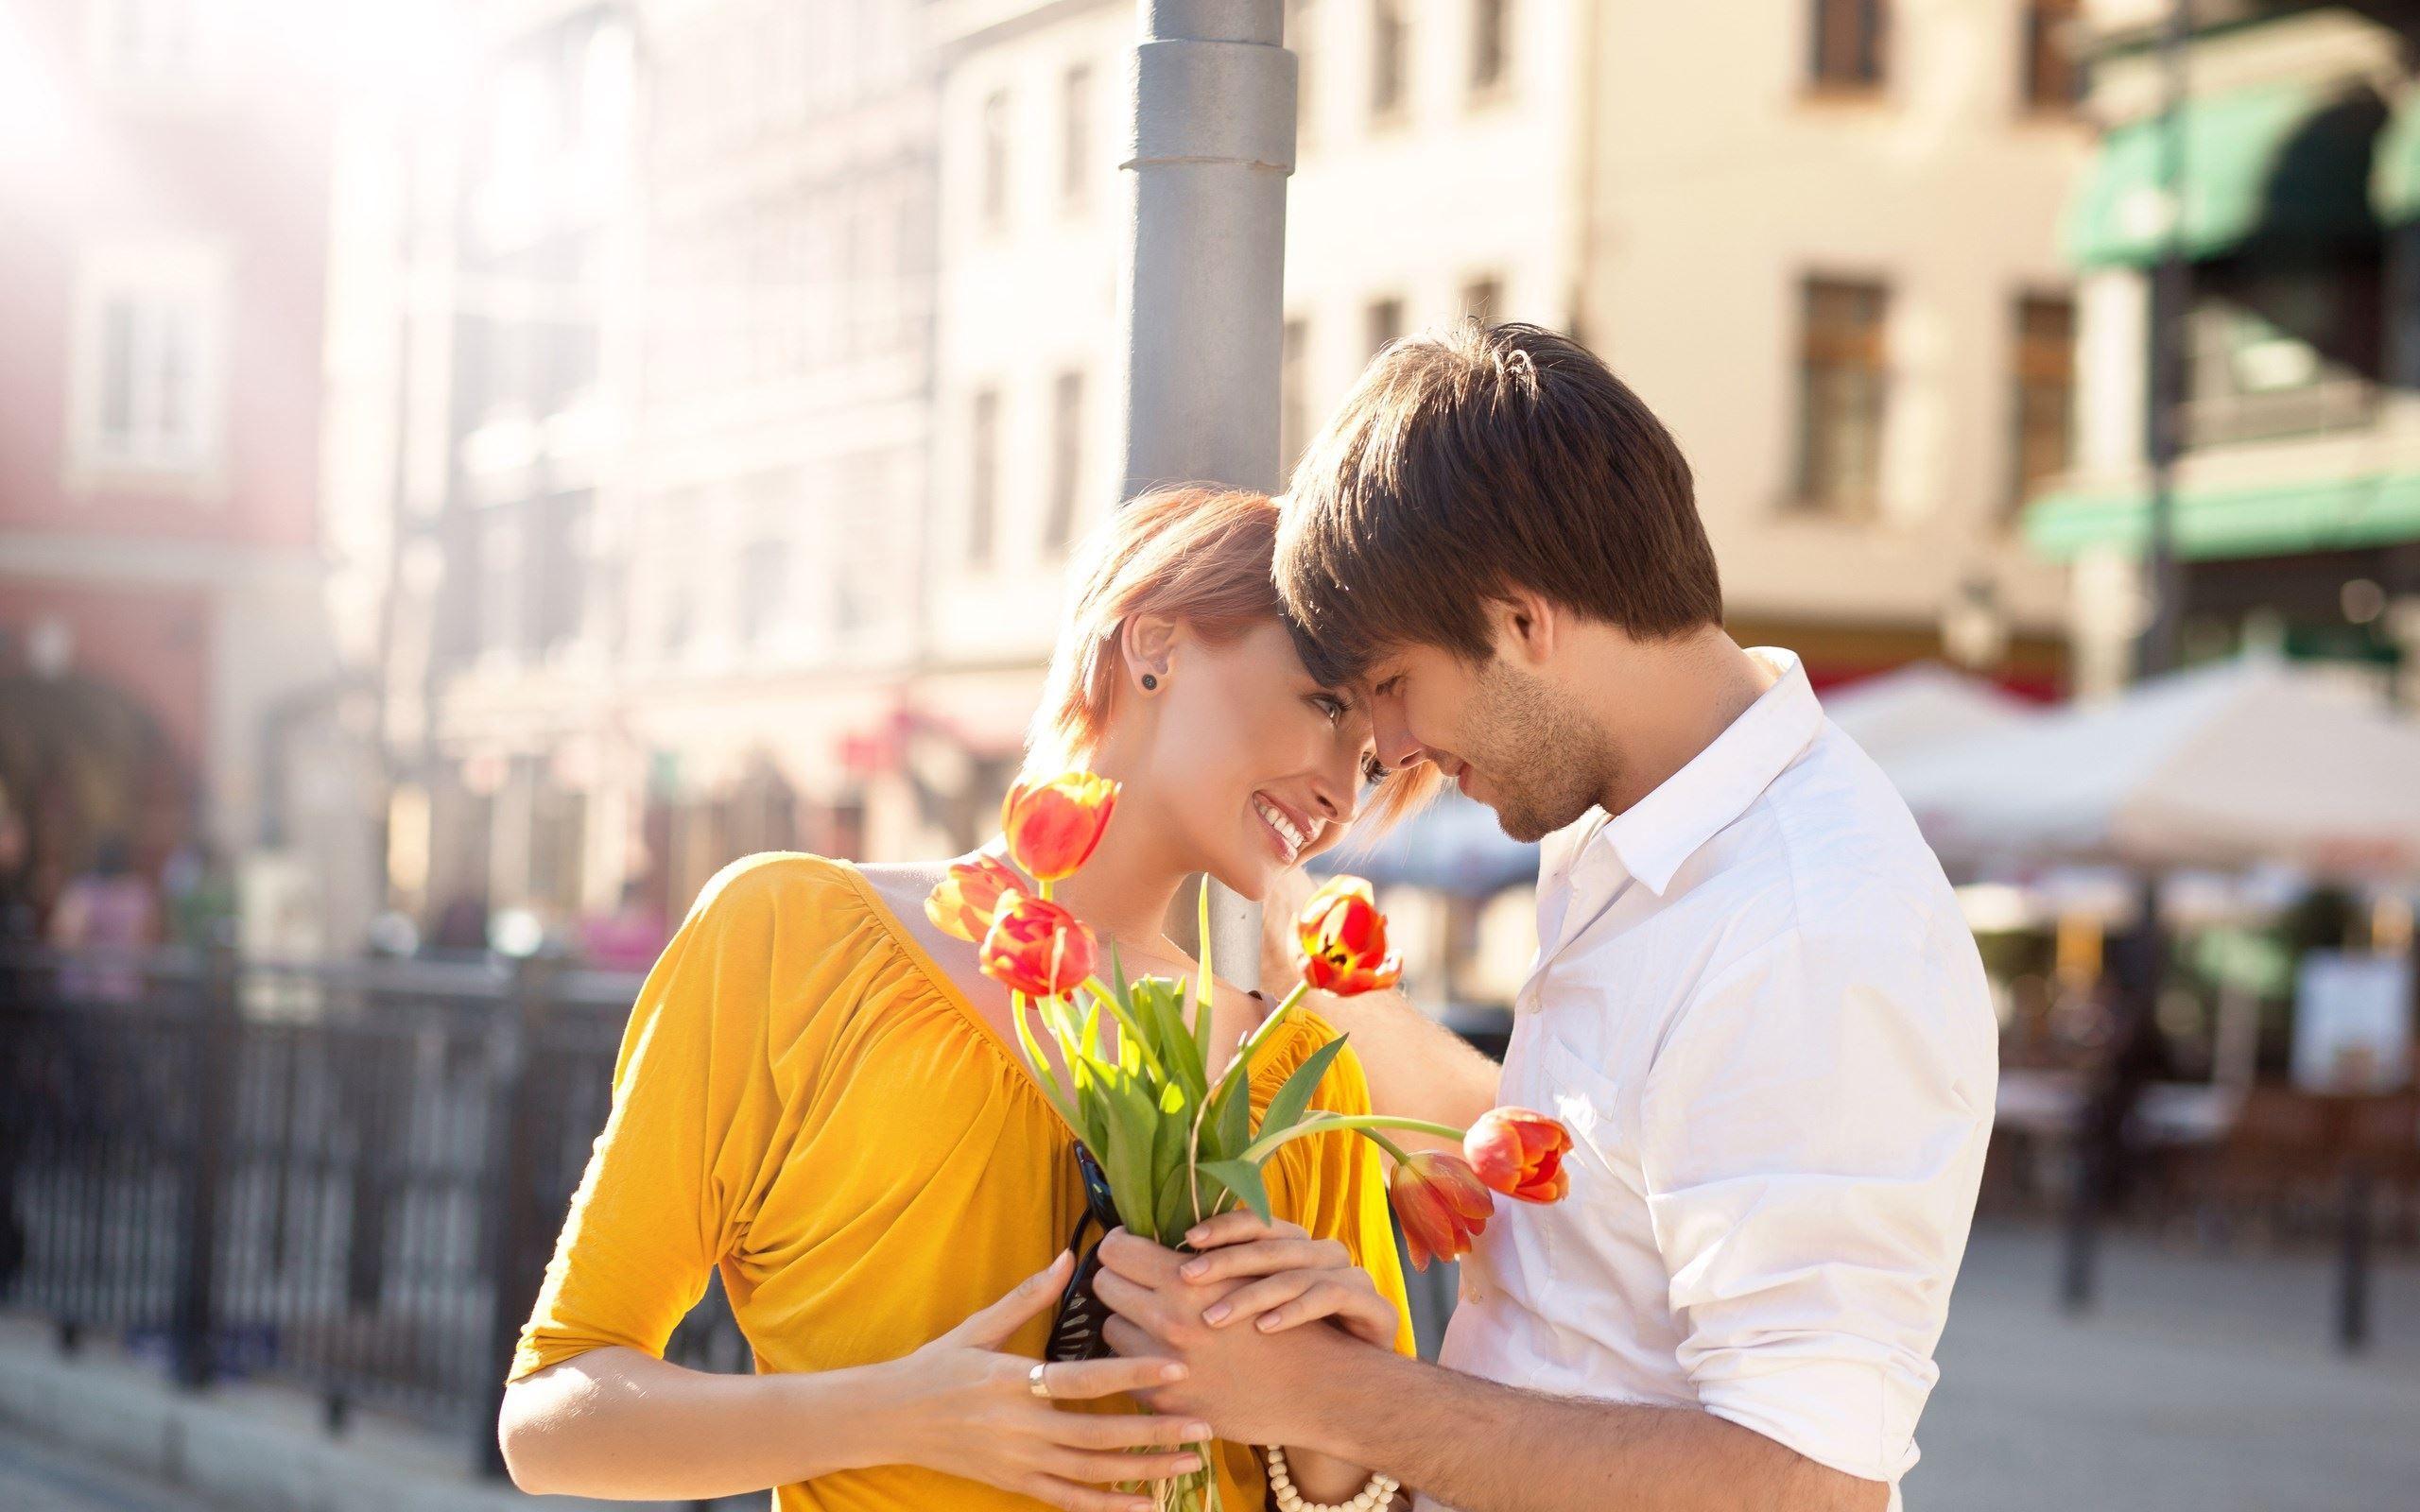 Love Couple Wallpaper For Mobile, Find best latest Love Couple